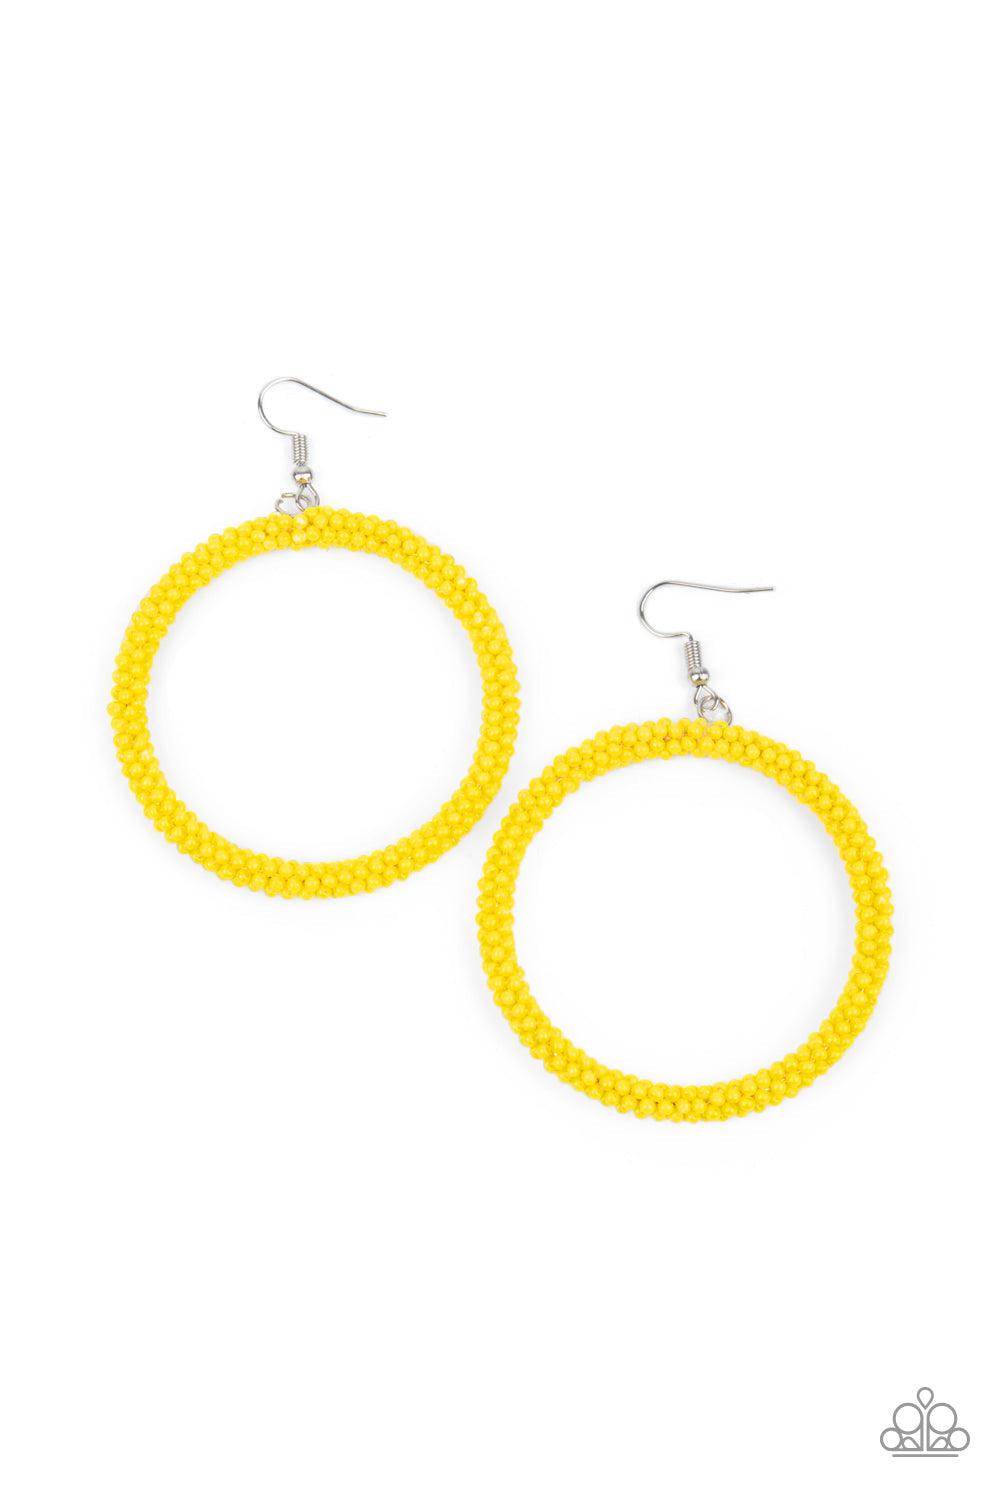 Beauty and the BEACH Yellow Seed Bead Earrings - Paparazzi Accessories- lightbox - CarasShop.com - $5 Jewelry by Cara Jewels